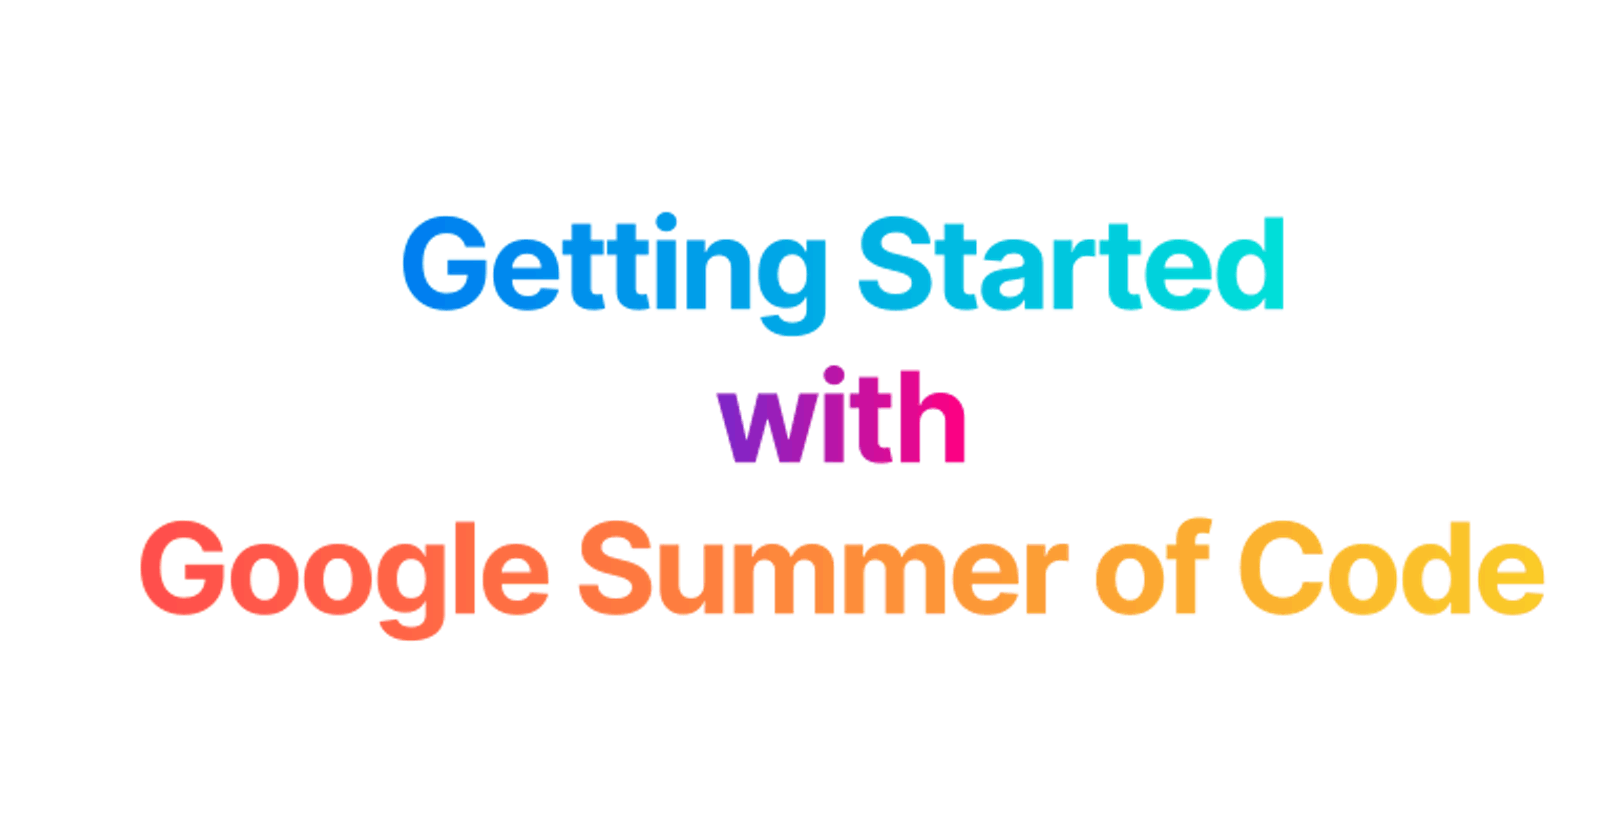 Getting Started with Google Summer of Code